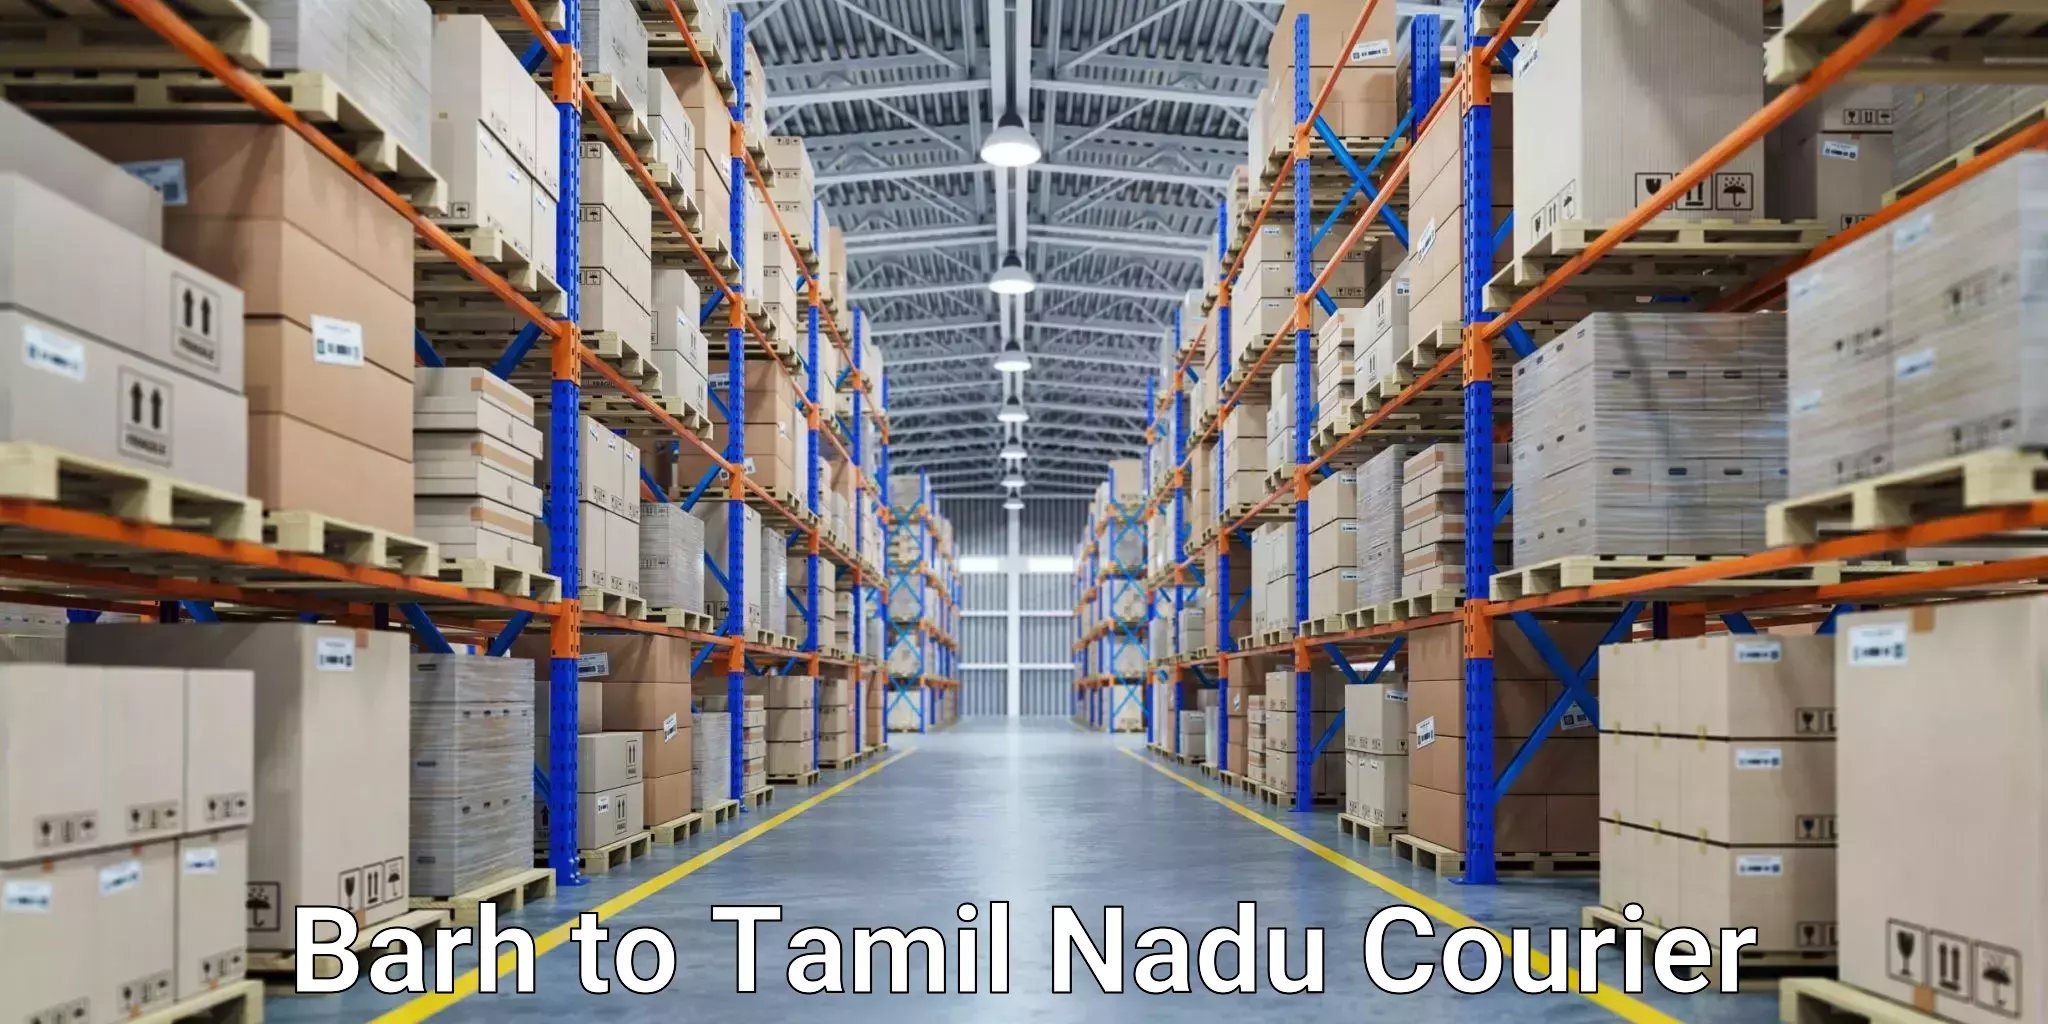 Same-day delivery options Barh to Tamil Nadu